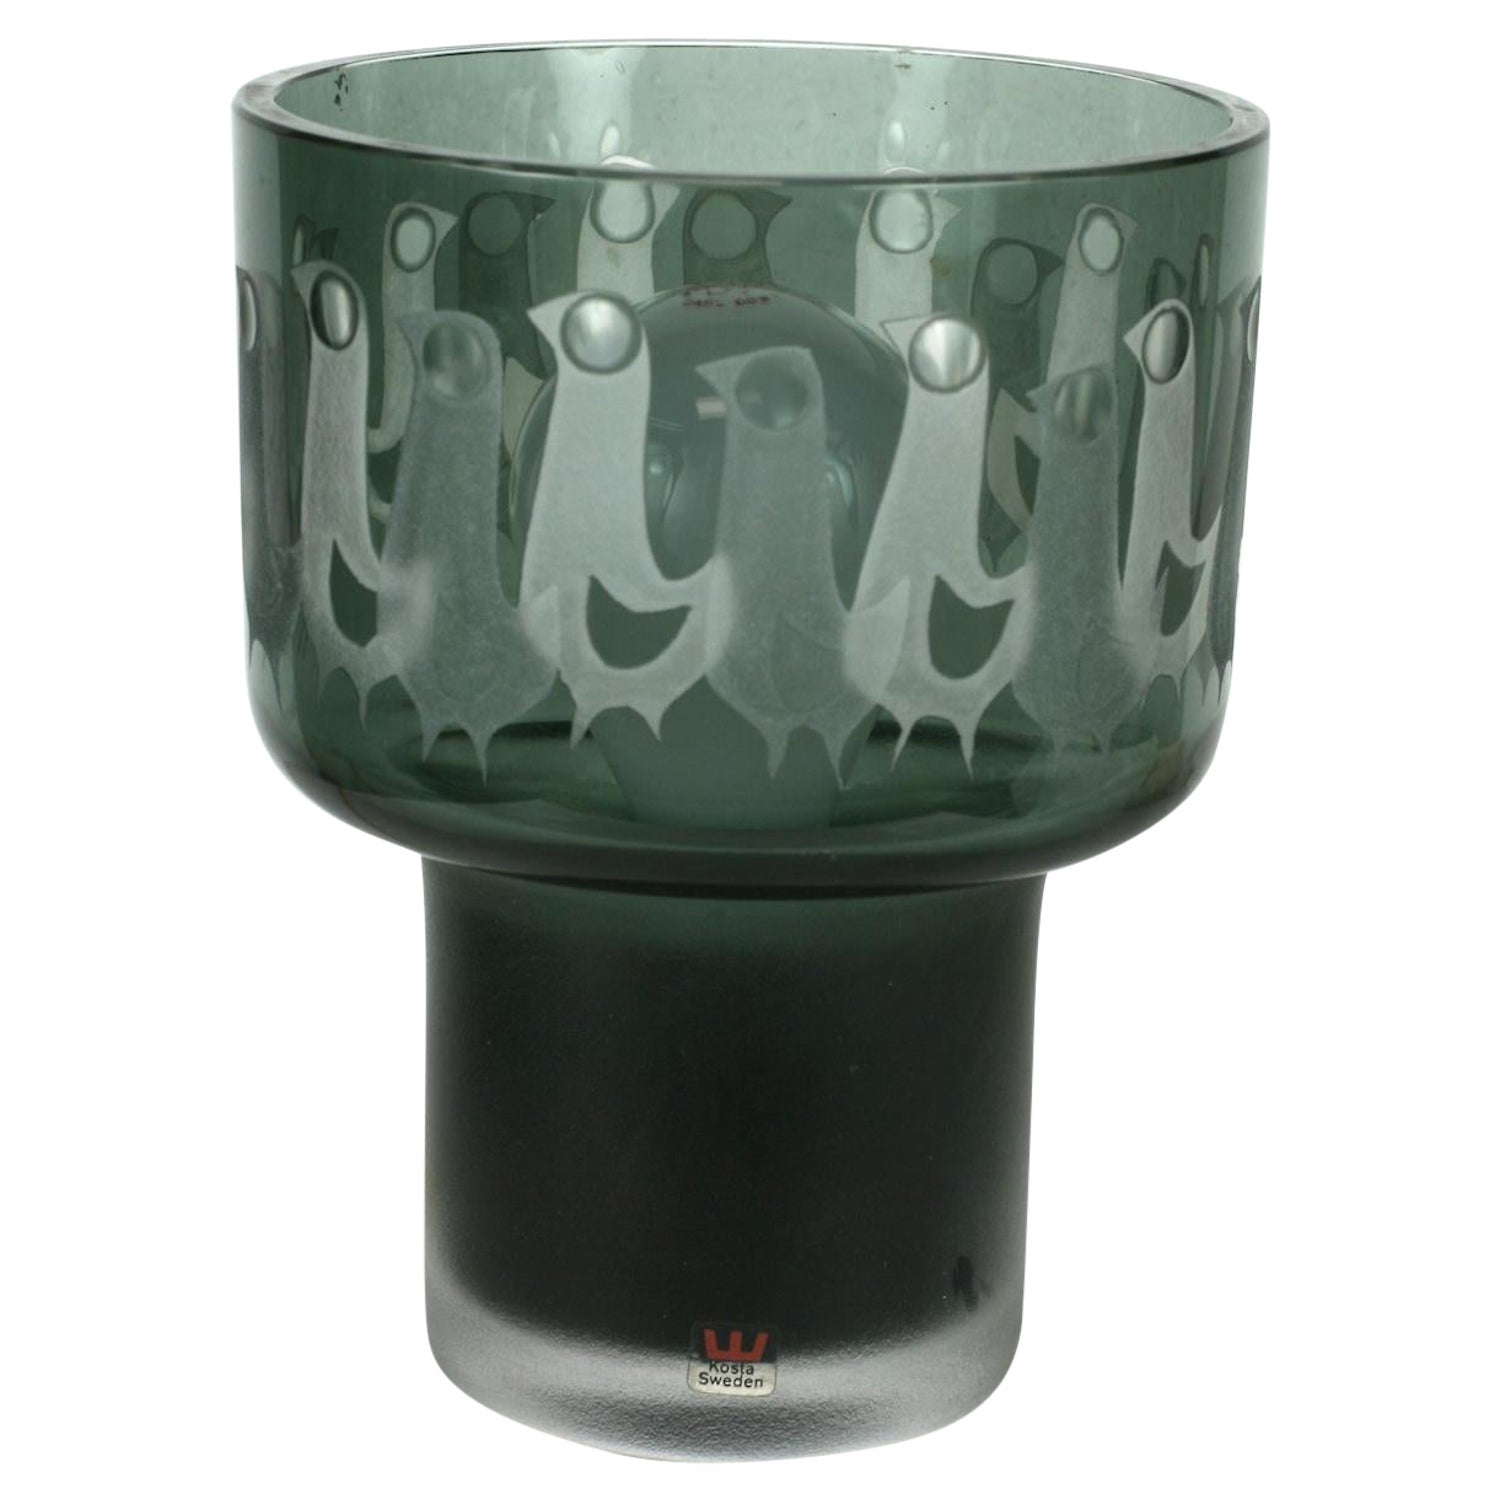 Kosta Boda Grey Glass Etched Bird Lamp, by Ove Sandeberg For Sale at 1stDibs